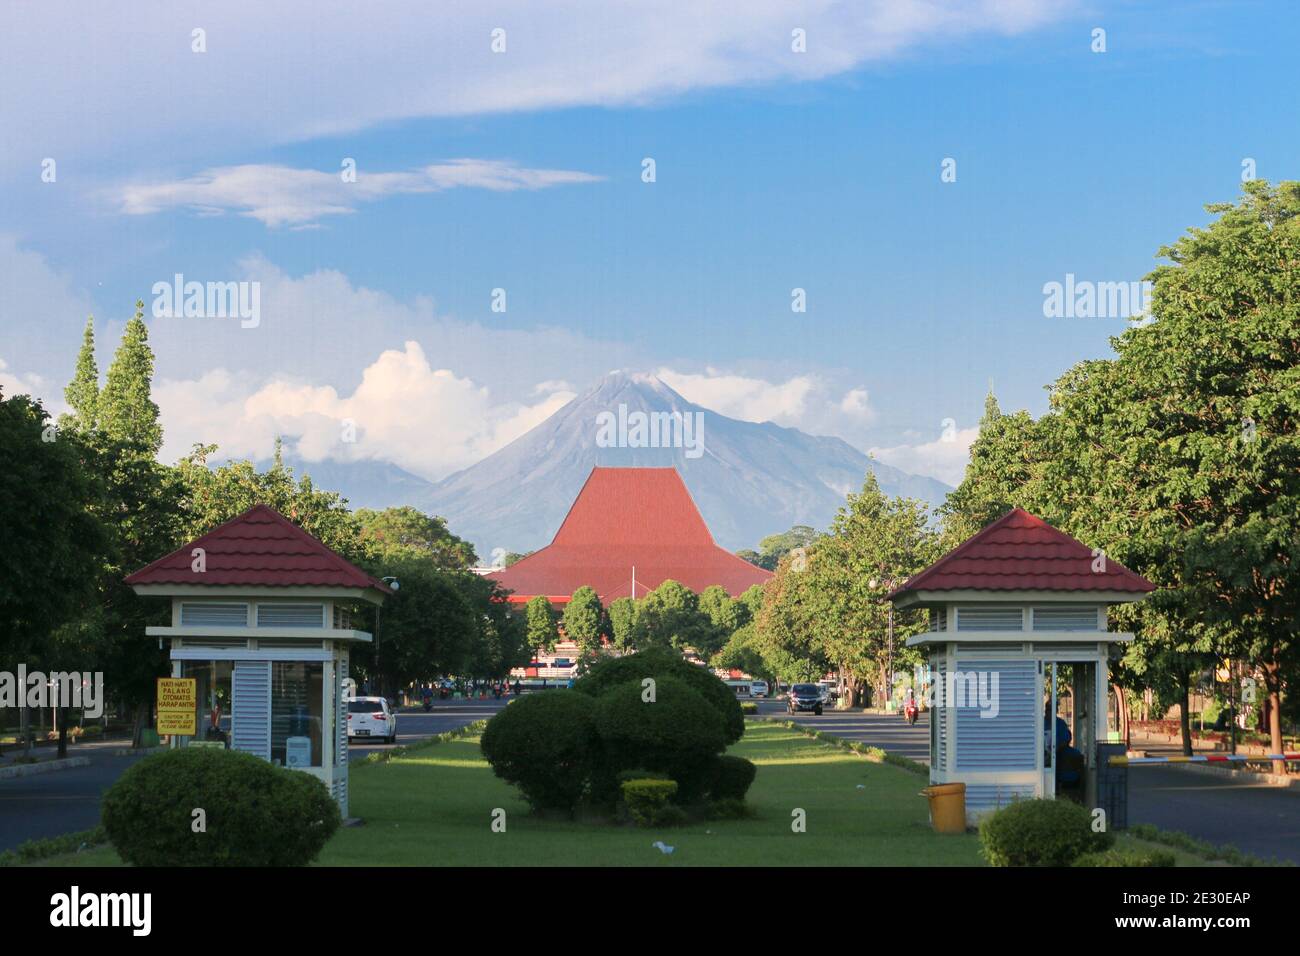 Yogyakarta, Indonesia - March 1, 2020: Gadjah Mada University front gate with Merapi mountain in the background. Stock Photo